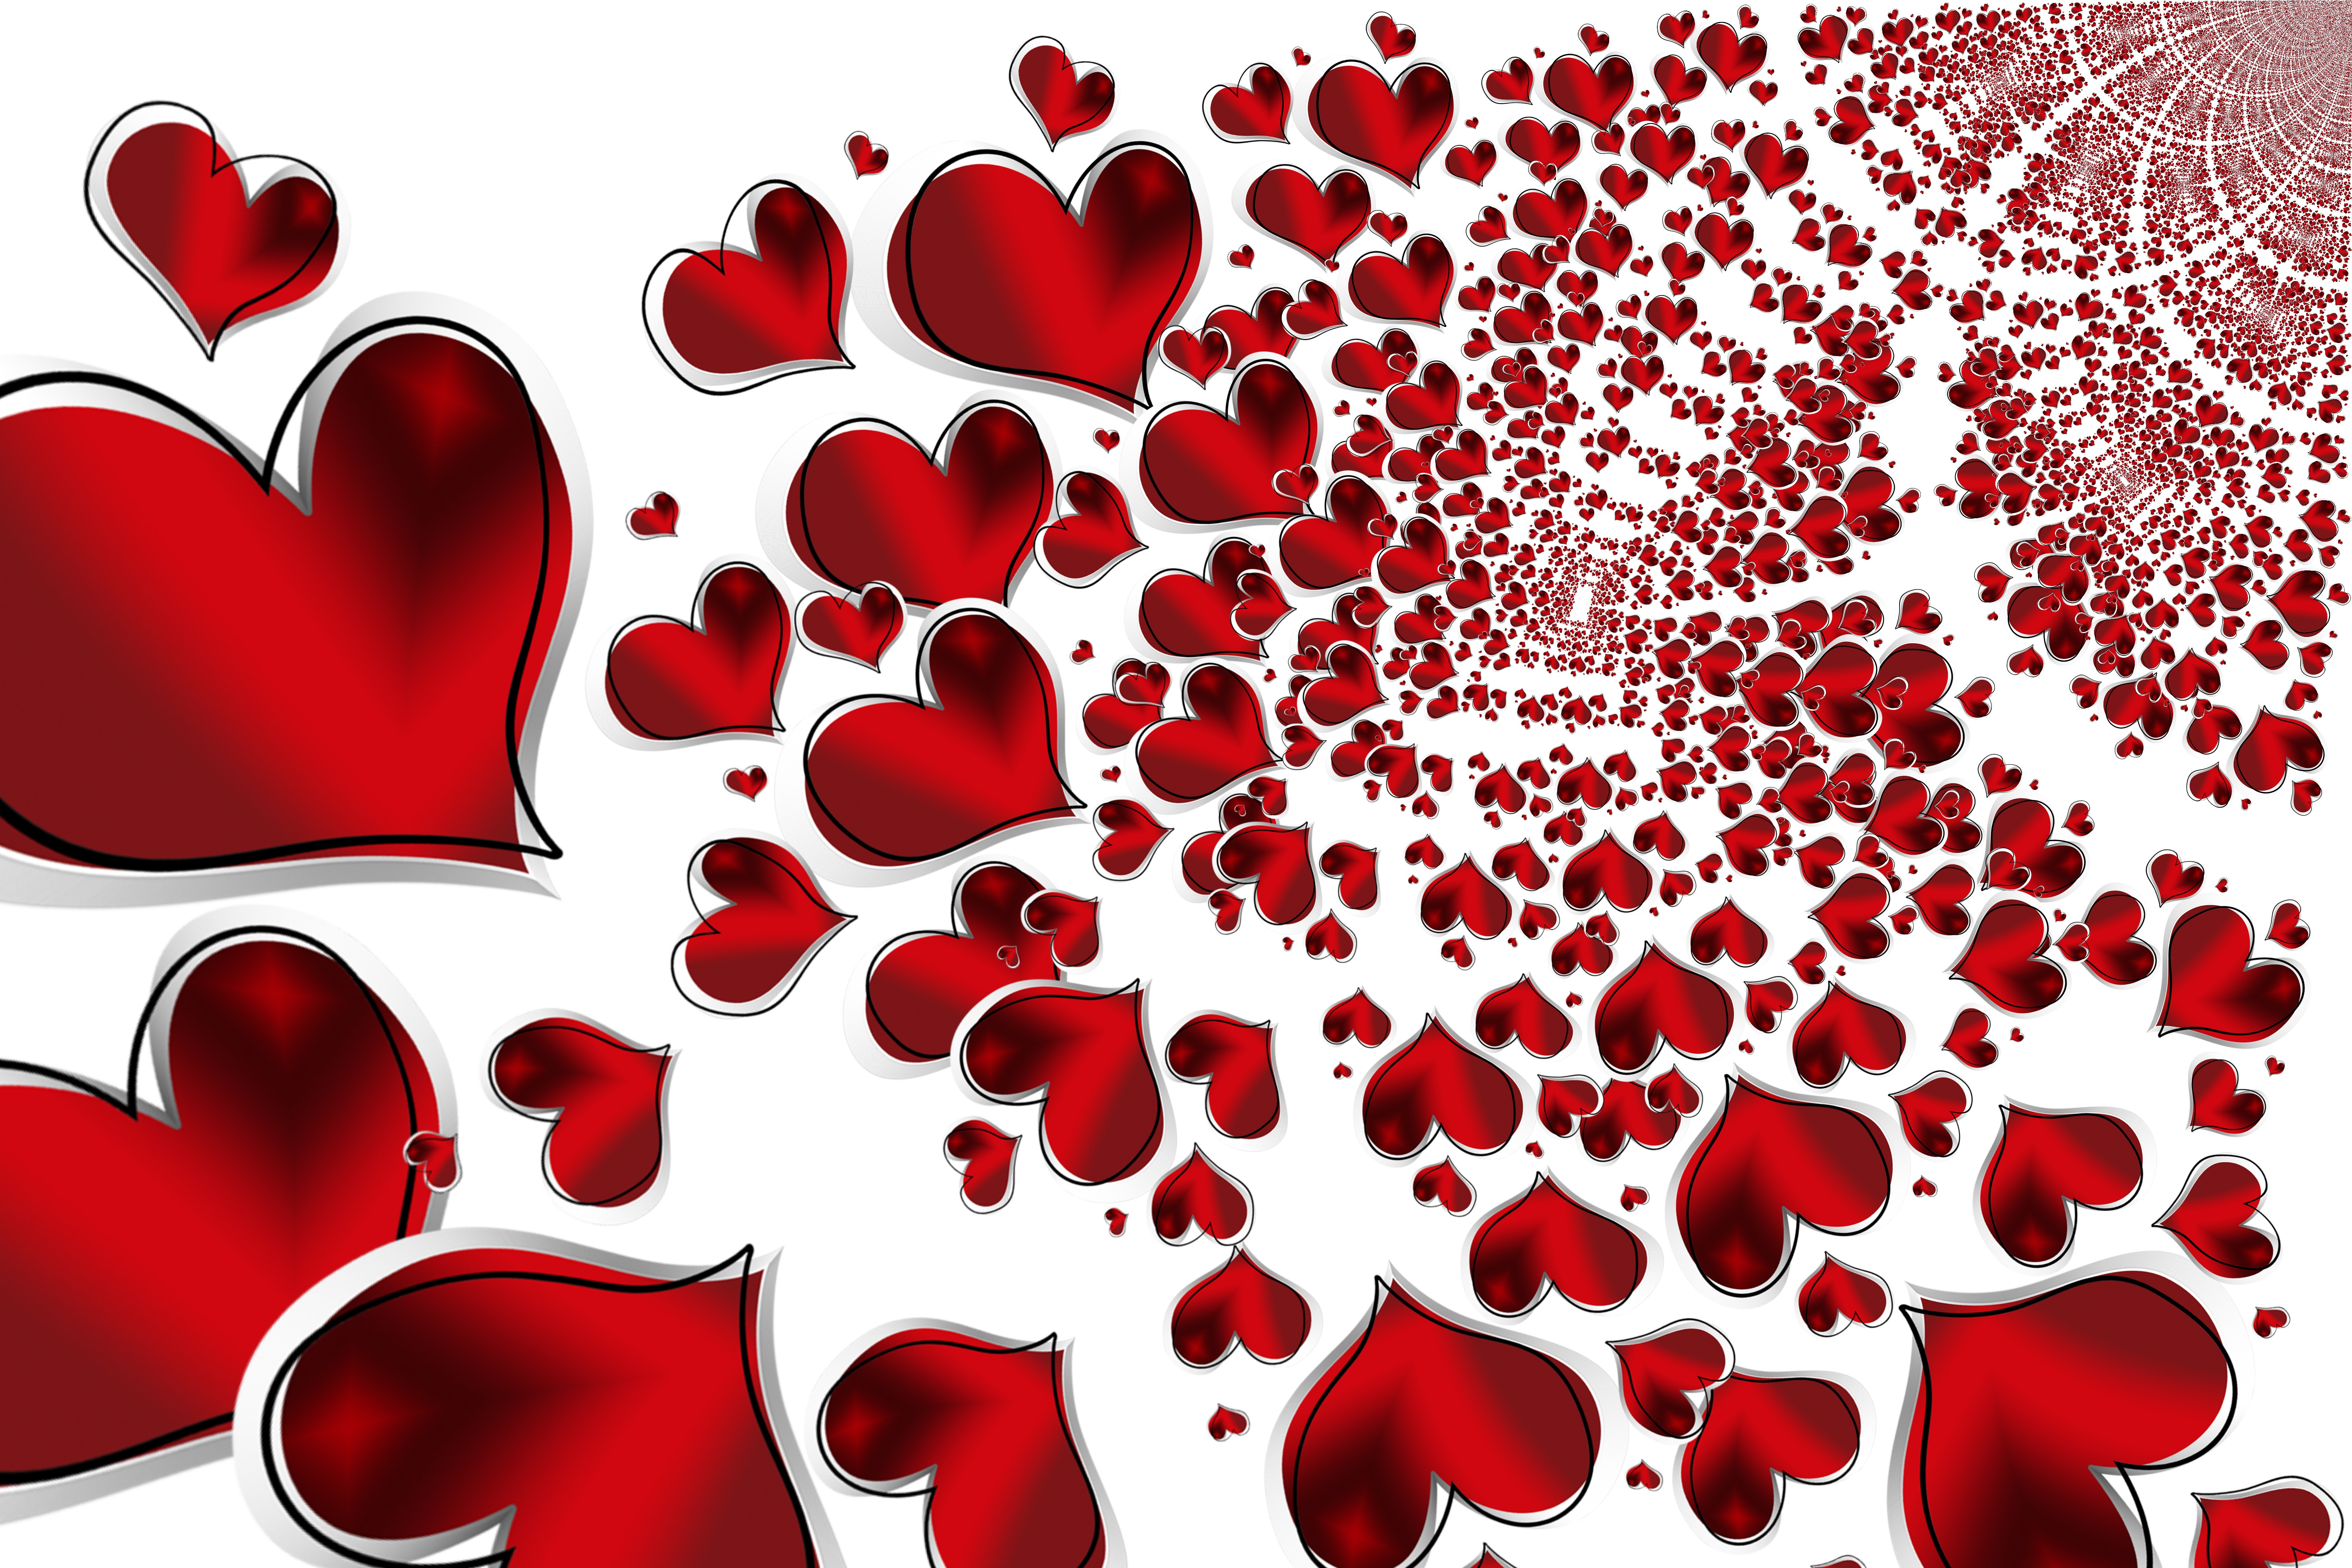 Wallpapers miscellaneous heart many on the desktop